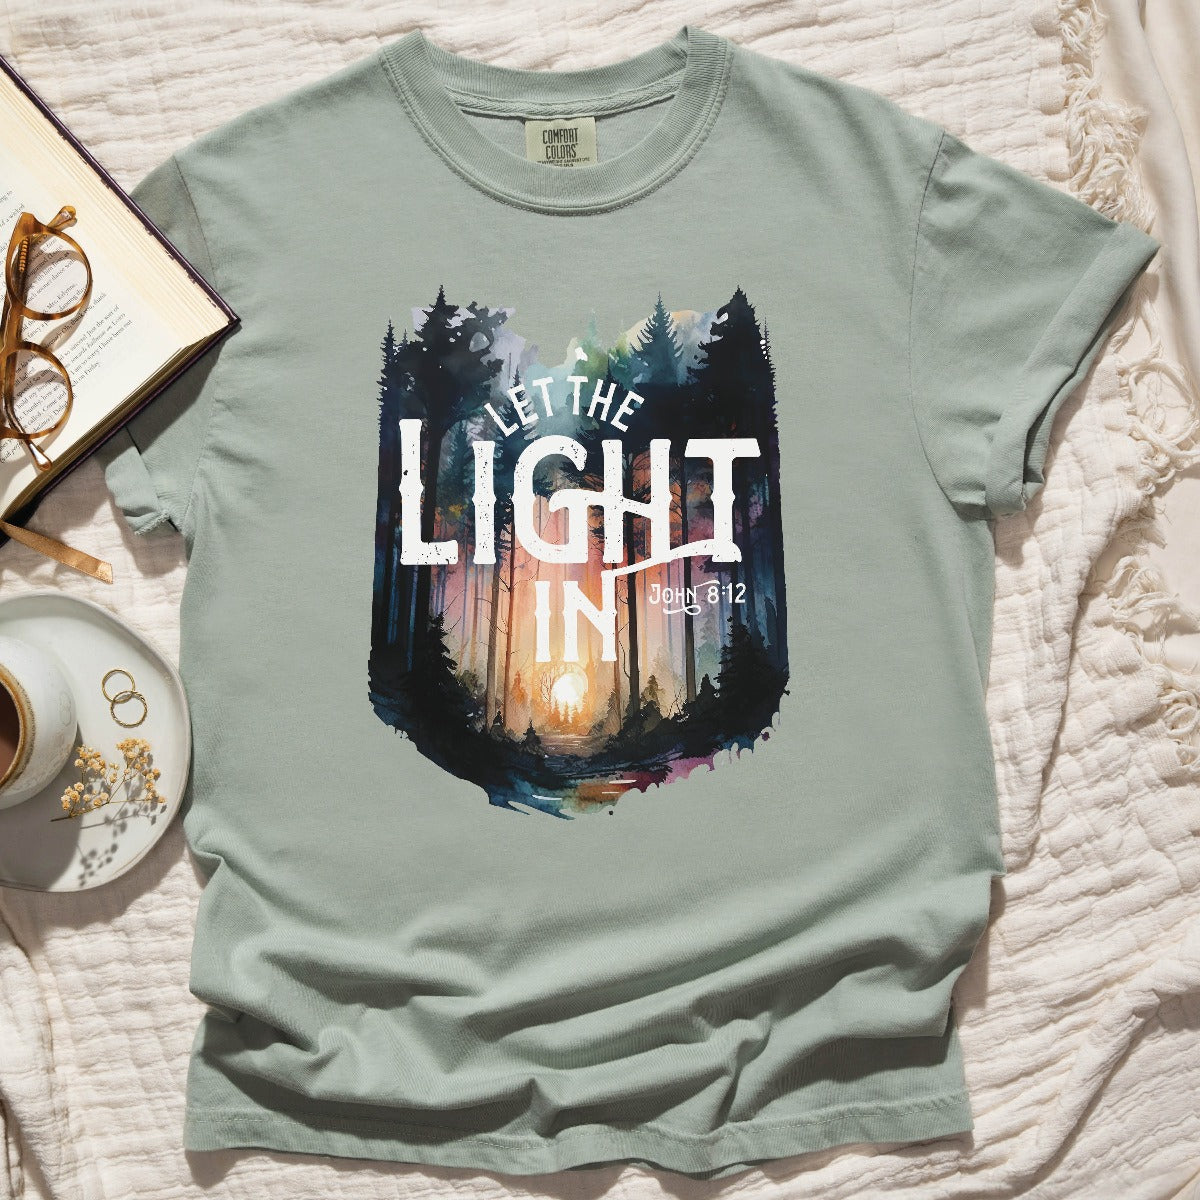 Bay light blue / green garment dyed Comfort Colors C1717 unisex faith-based Christian t-shirt with "Let the Light In" John 8:12 bible verse and watercolor moody forest trees scene, designed for men and women